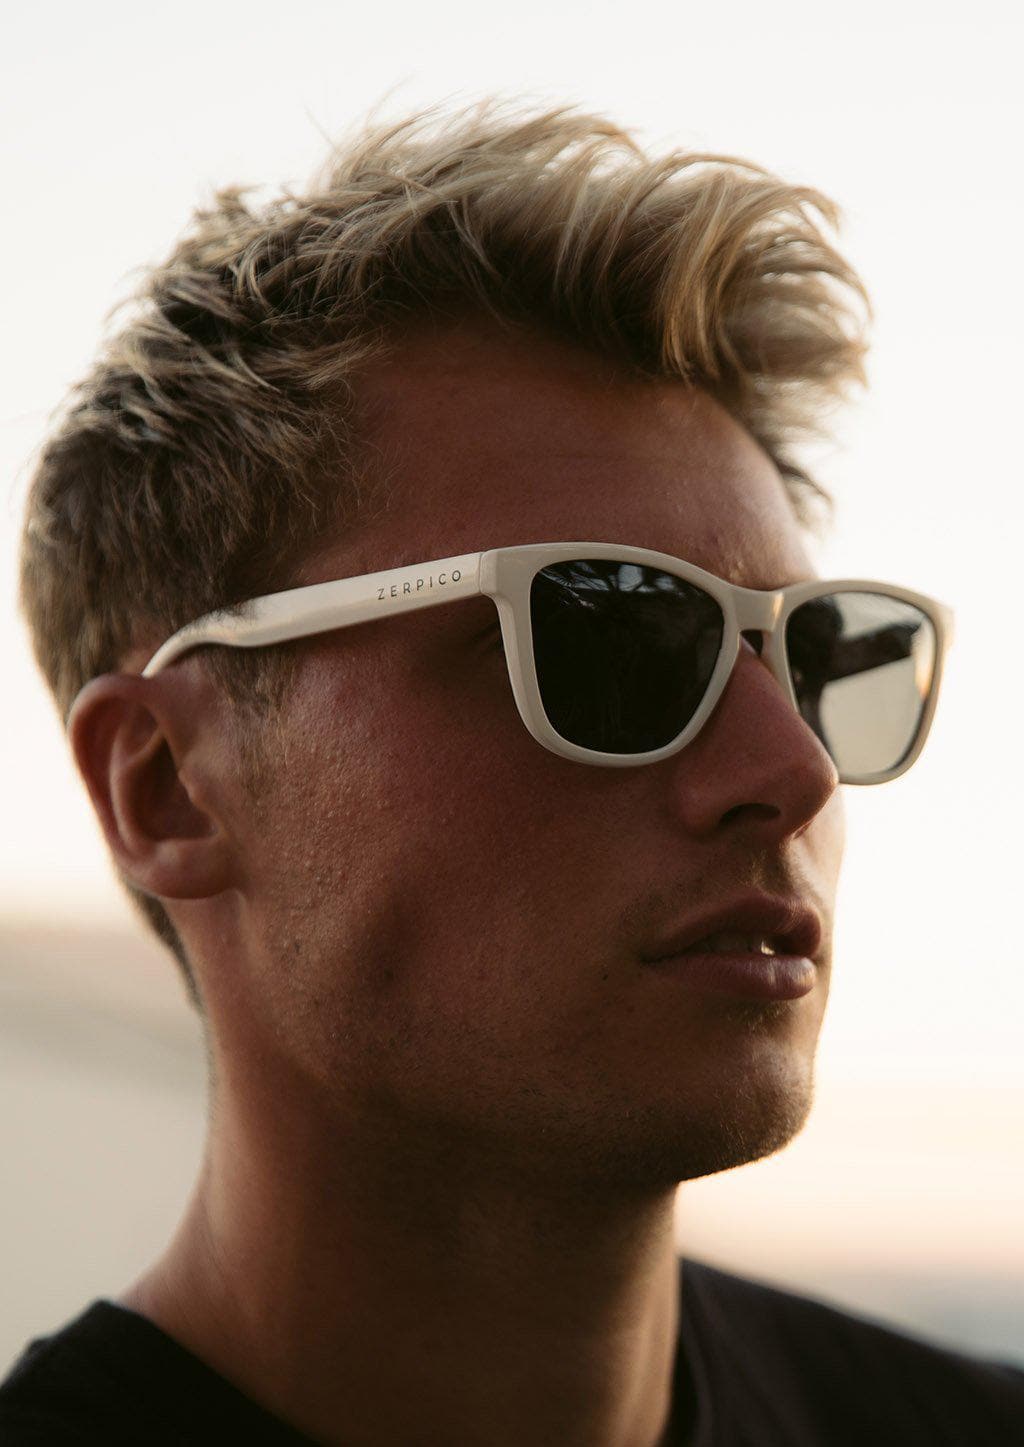 Our Mood V2 is an improved version of our last wayfarers. Plastic body for great quality and durabilty. This is Ace with white frame and black lenses. Lifestyle photo on male model.